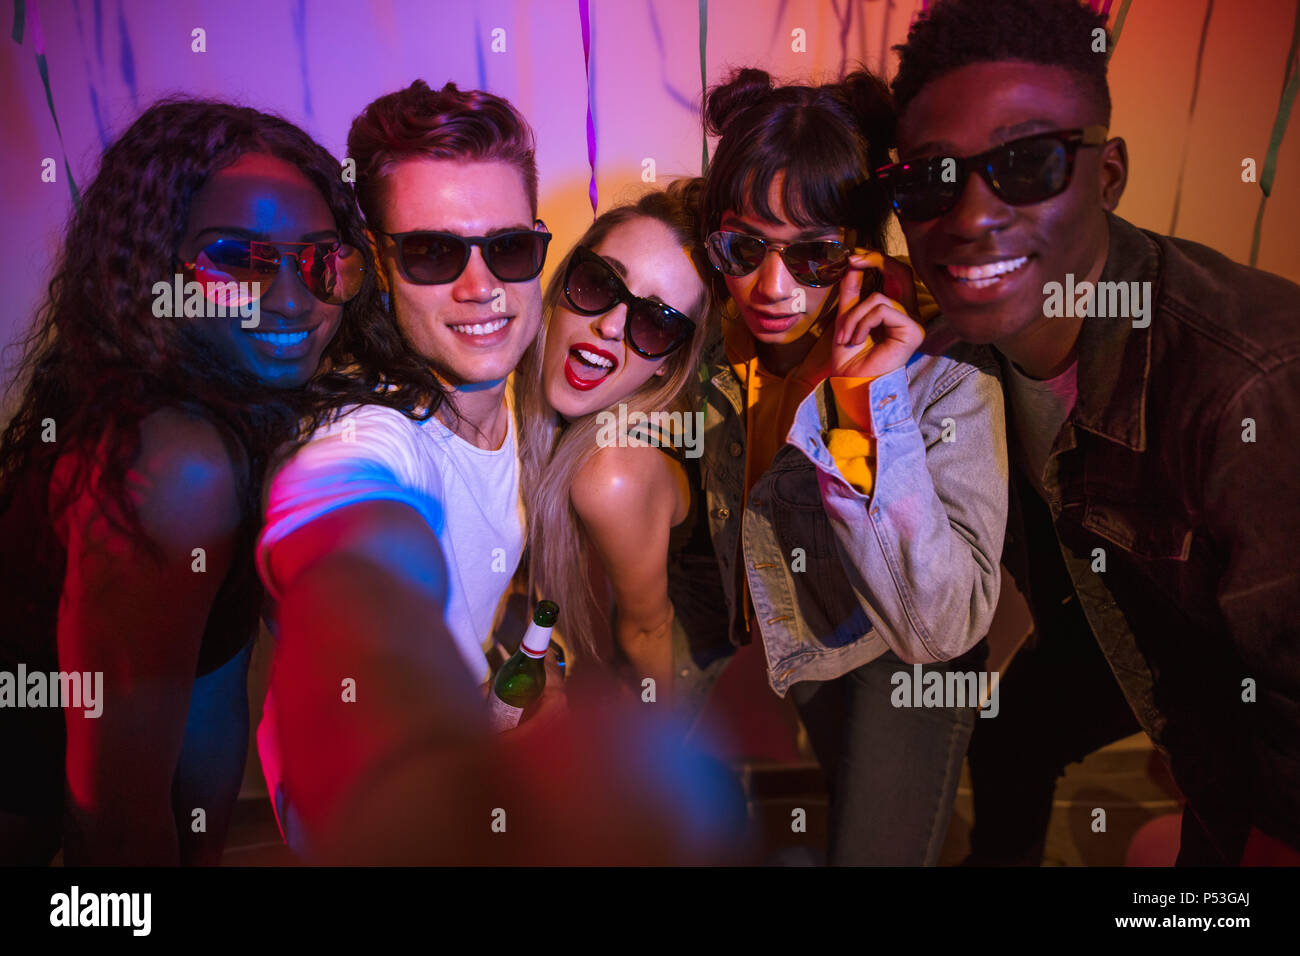 Friends posing for a selfie wearing dark sunglasses at a house party. Young men and women having fun at a colorful house party. Stock Photo